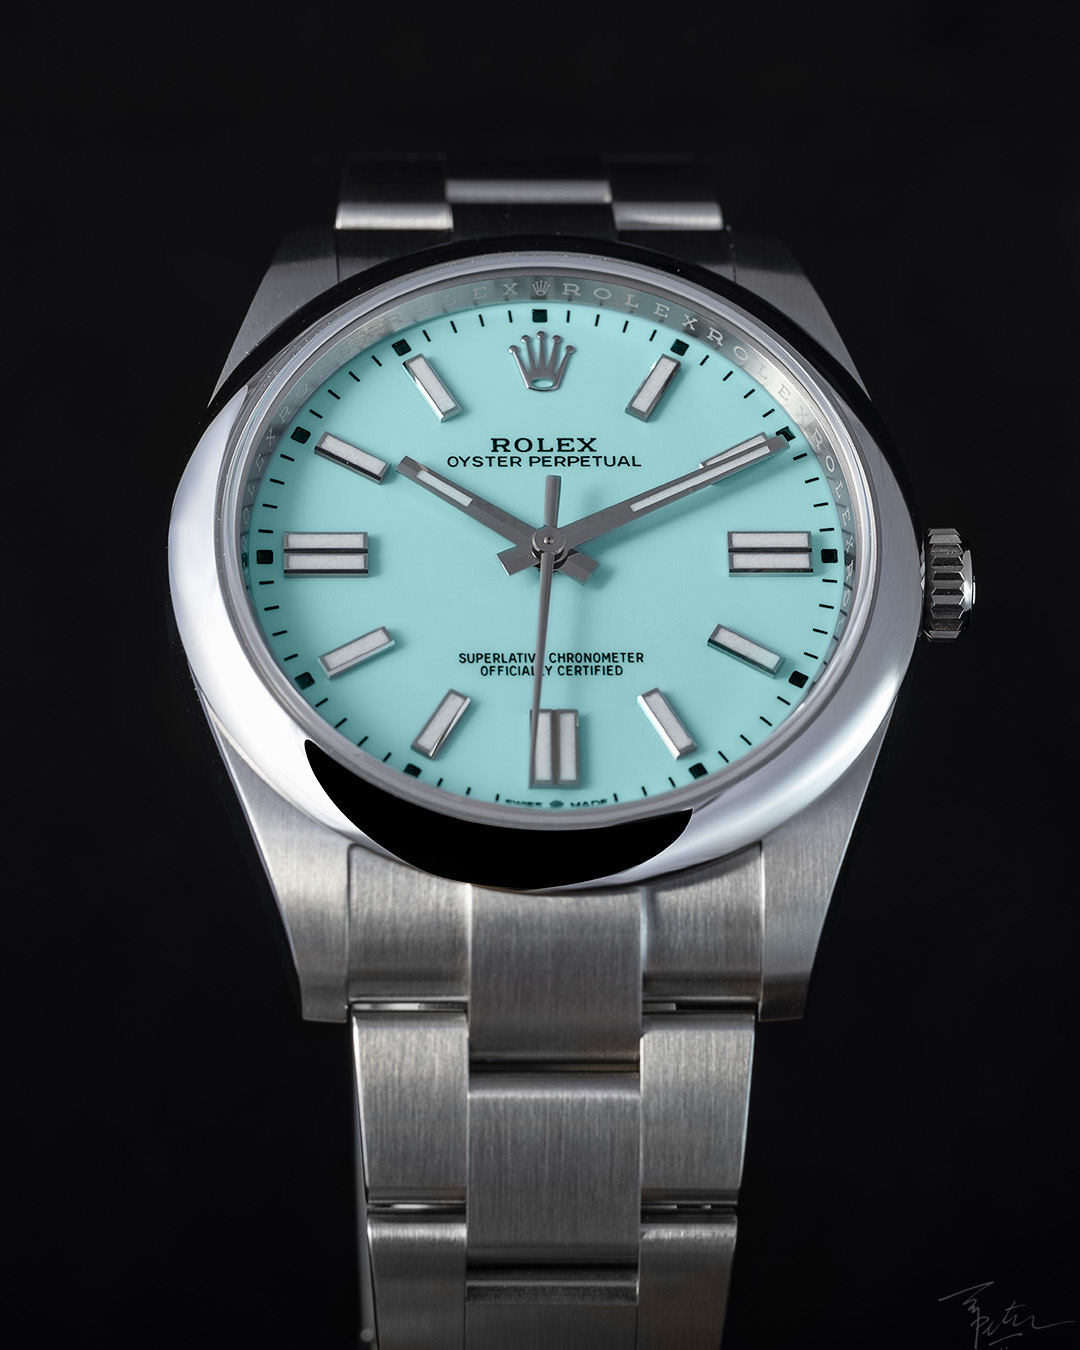 The new Rolex Oyster Perpetual in coloured dials - a analytical review